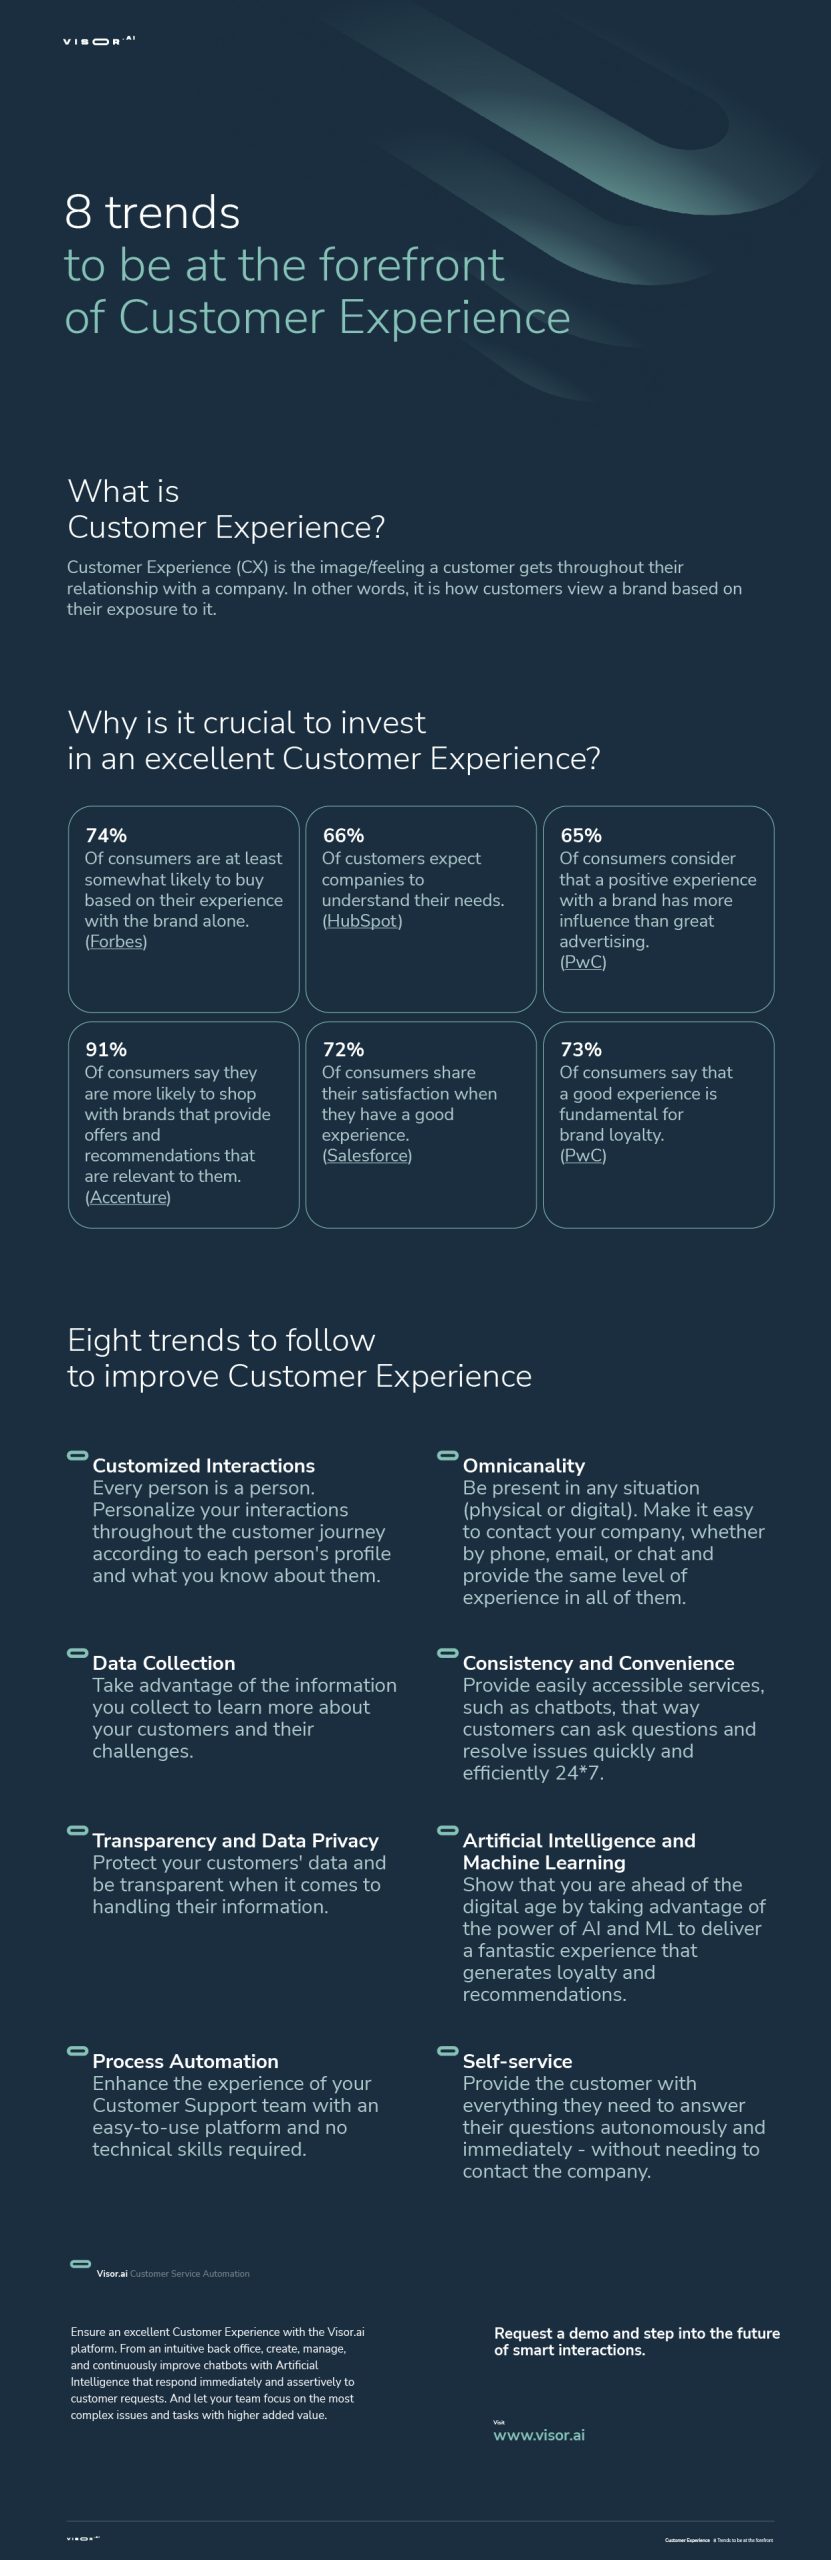 8 trends to be at the forefront of Customer Experience